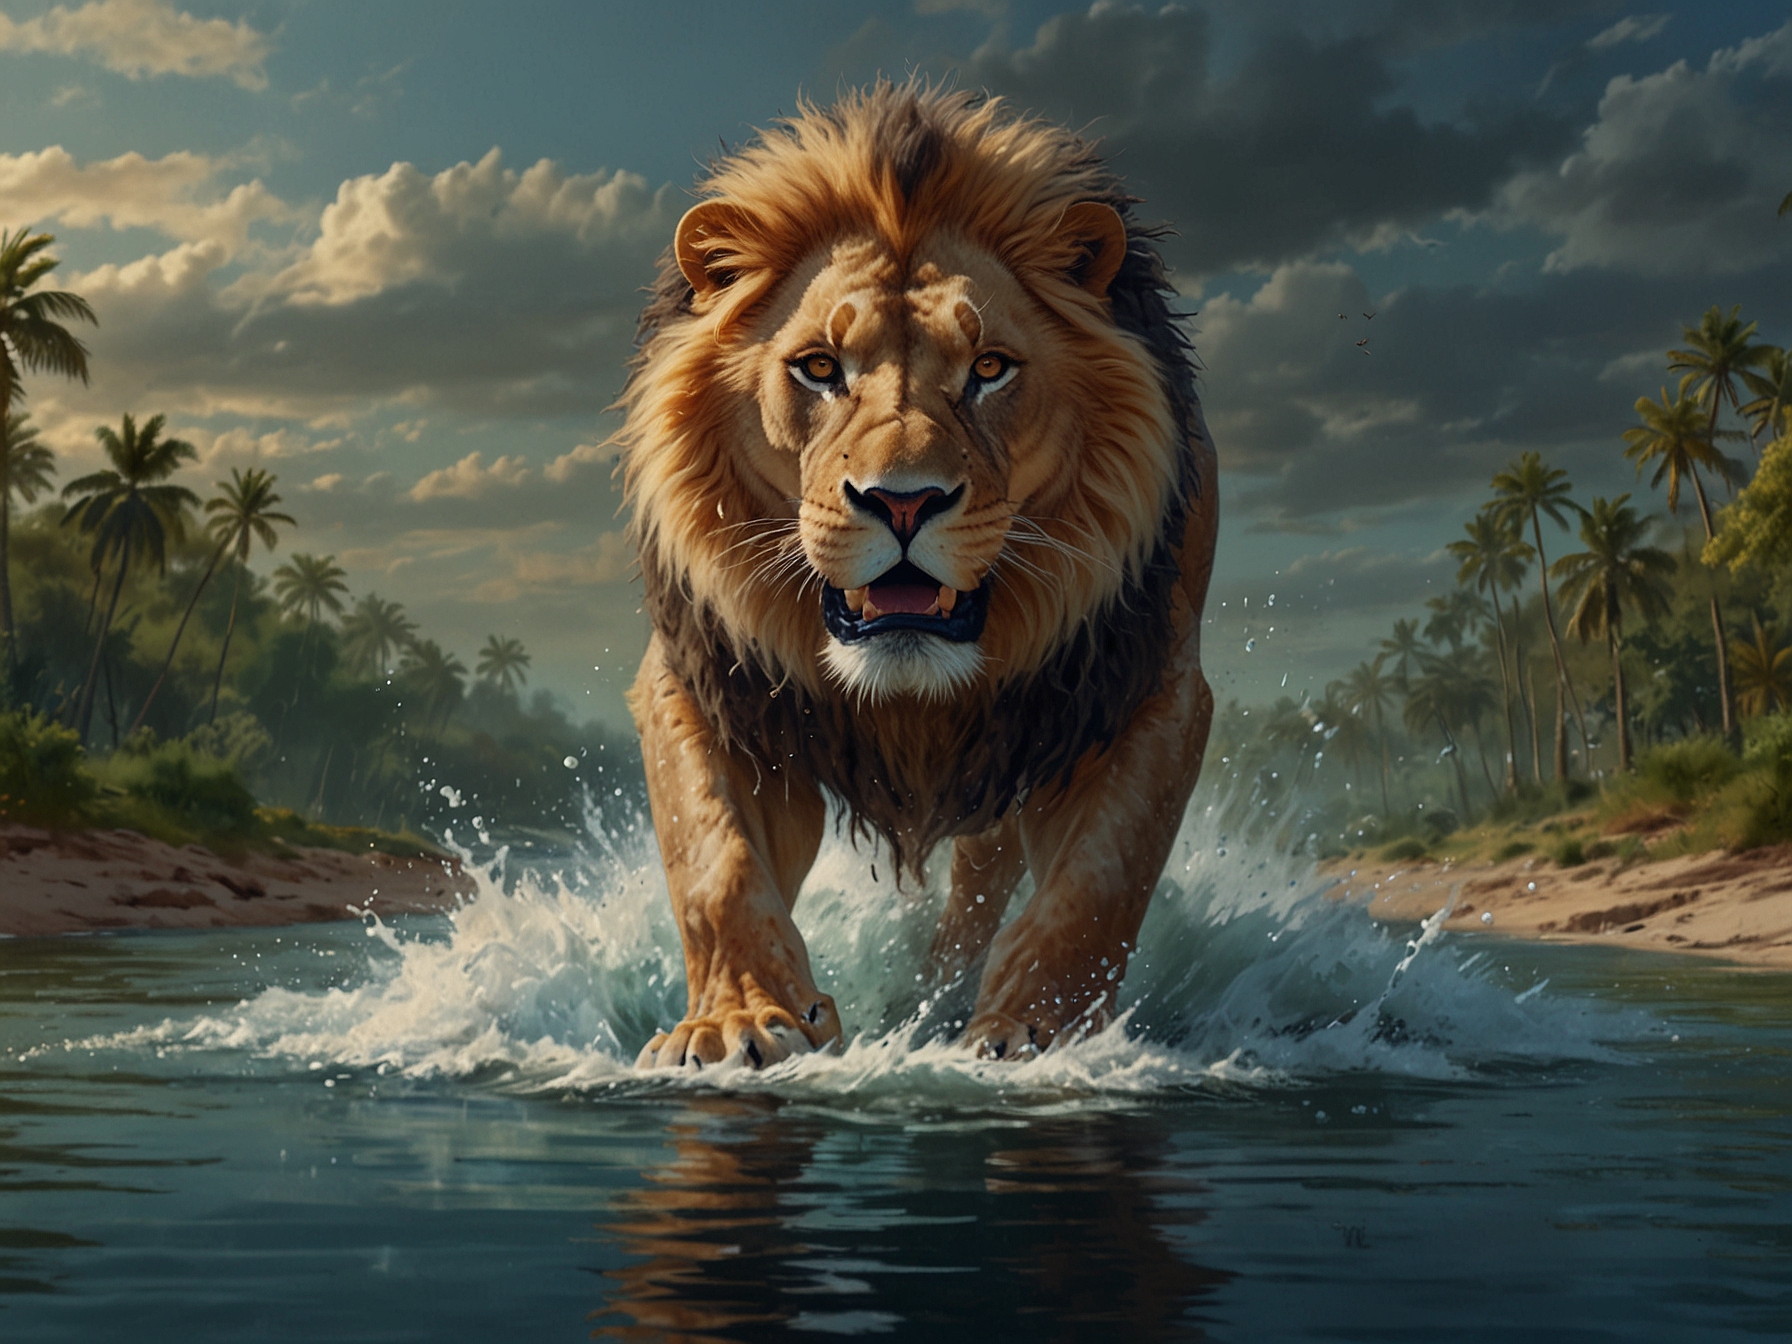 Jacob, the three-legged lion, cautiously approaches the edge of a crocodile-filled channel, setting the scene for his remarkable and dangerous swim across the river.